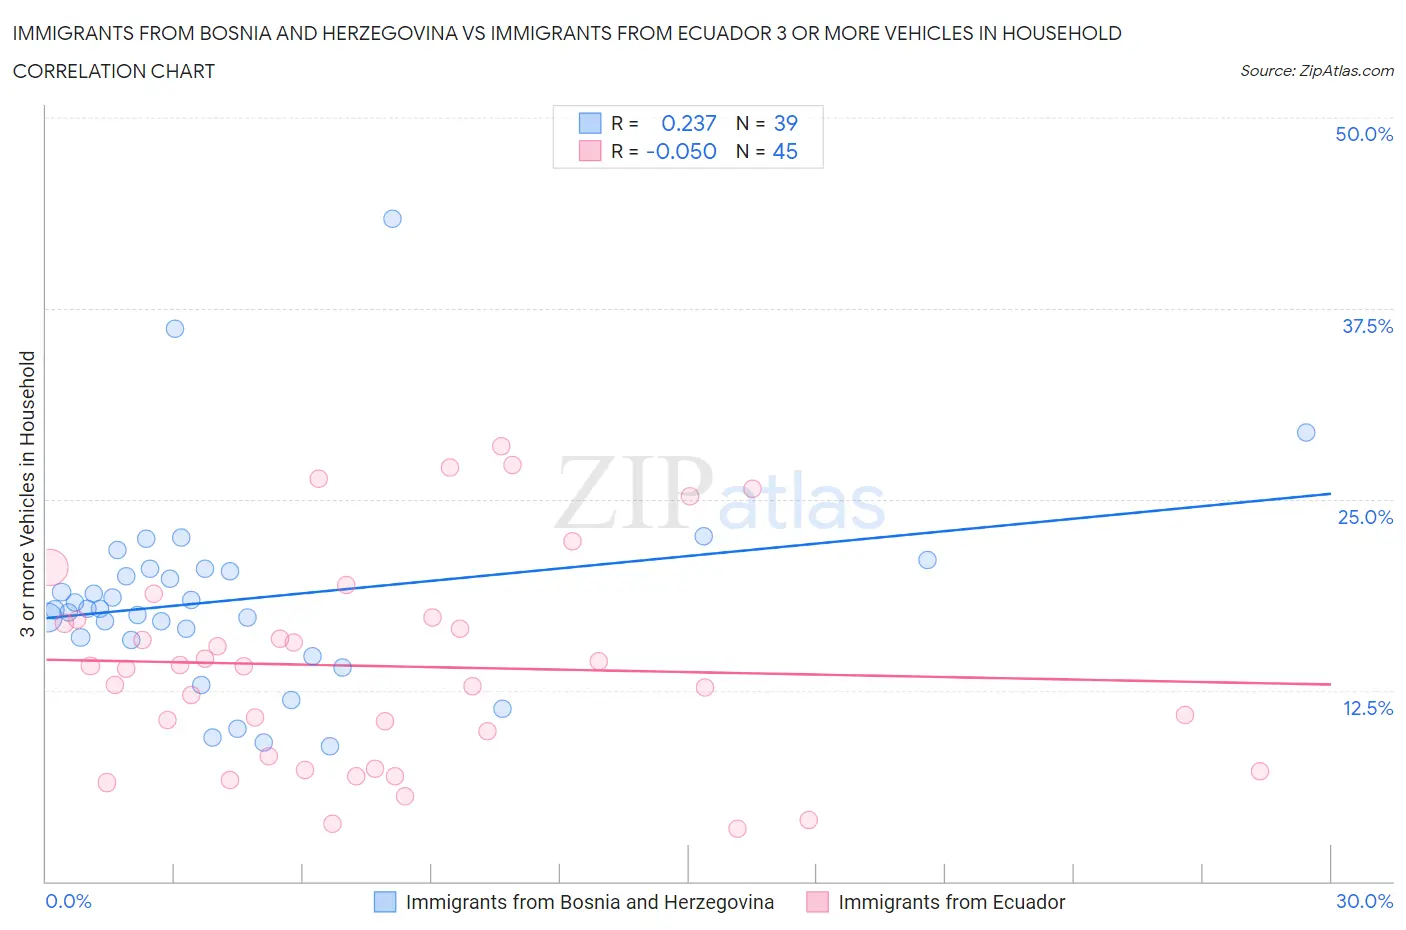 Immigrants from Bosnia and Herzegovina vs Immigrants from Ecuador 3 or more Vehicles in Household